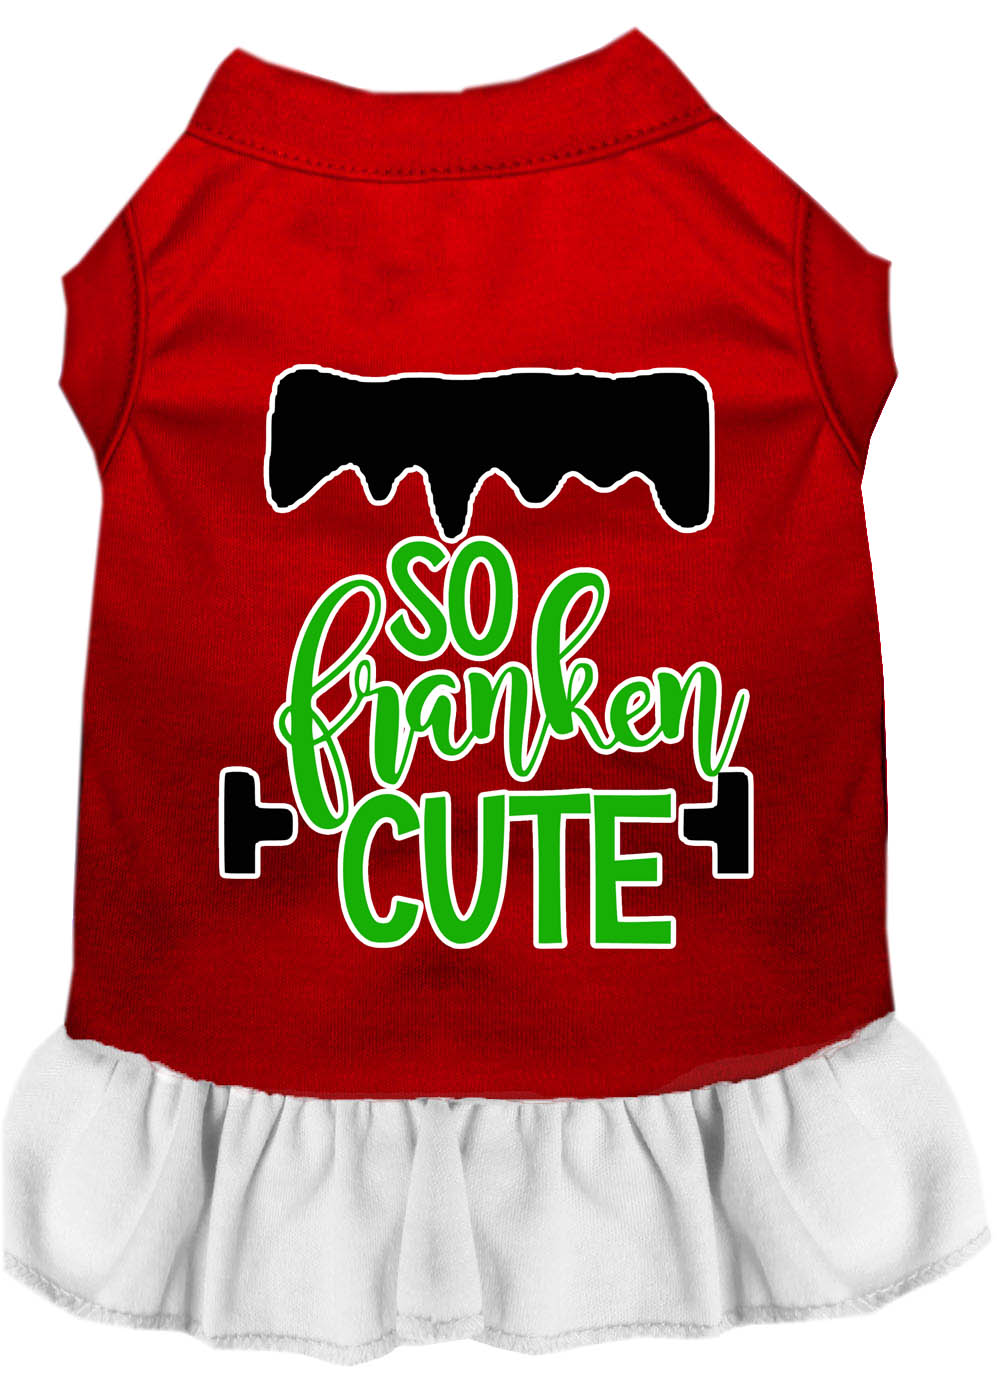 So Franken Cute Screen Print Dog Dress Red with White Sm